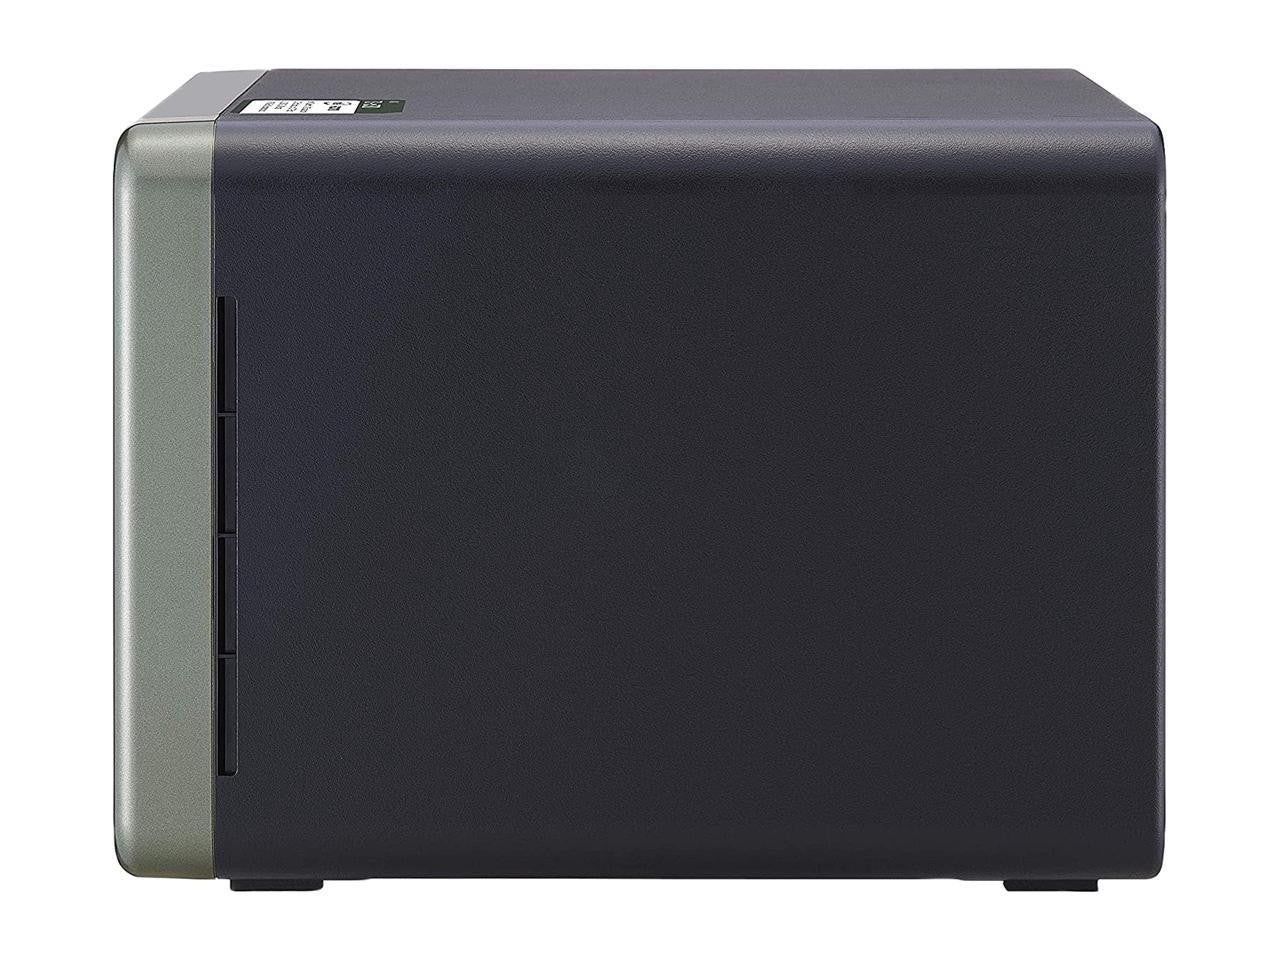 QNAP TS-253D Quad Core 2.7Ghz 2-Bay NAS with 4GB RAM and 24TB (2 x 12TB) of Seagate Ironwolf NAS Drives Fully Assembled and Tested By CustomTechSales